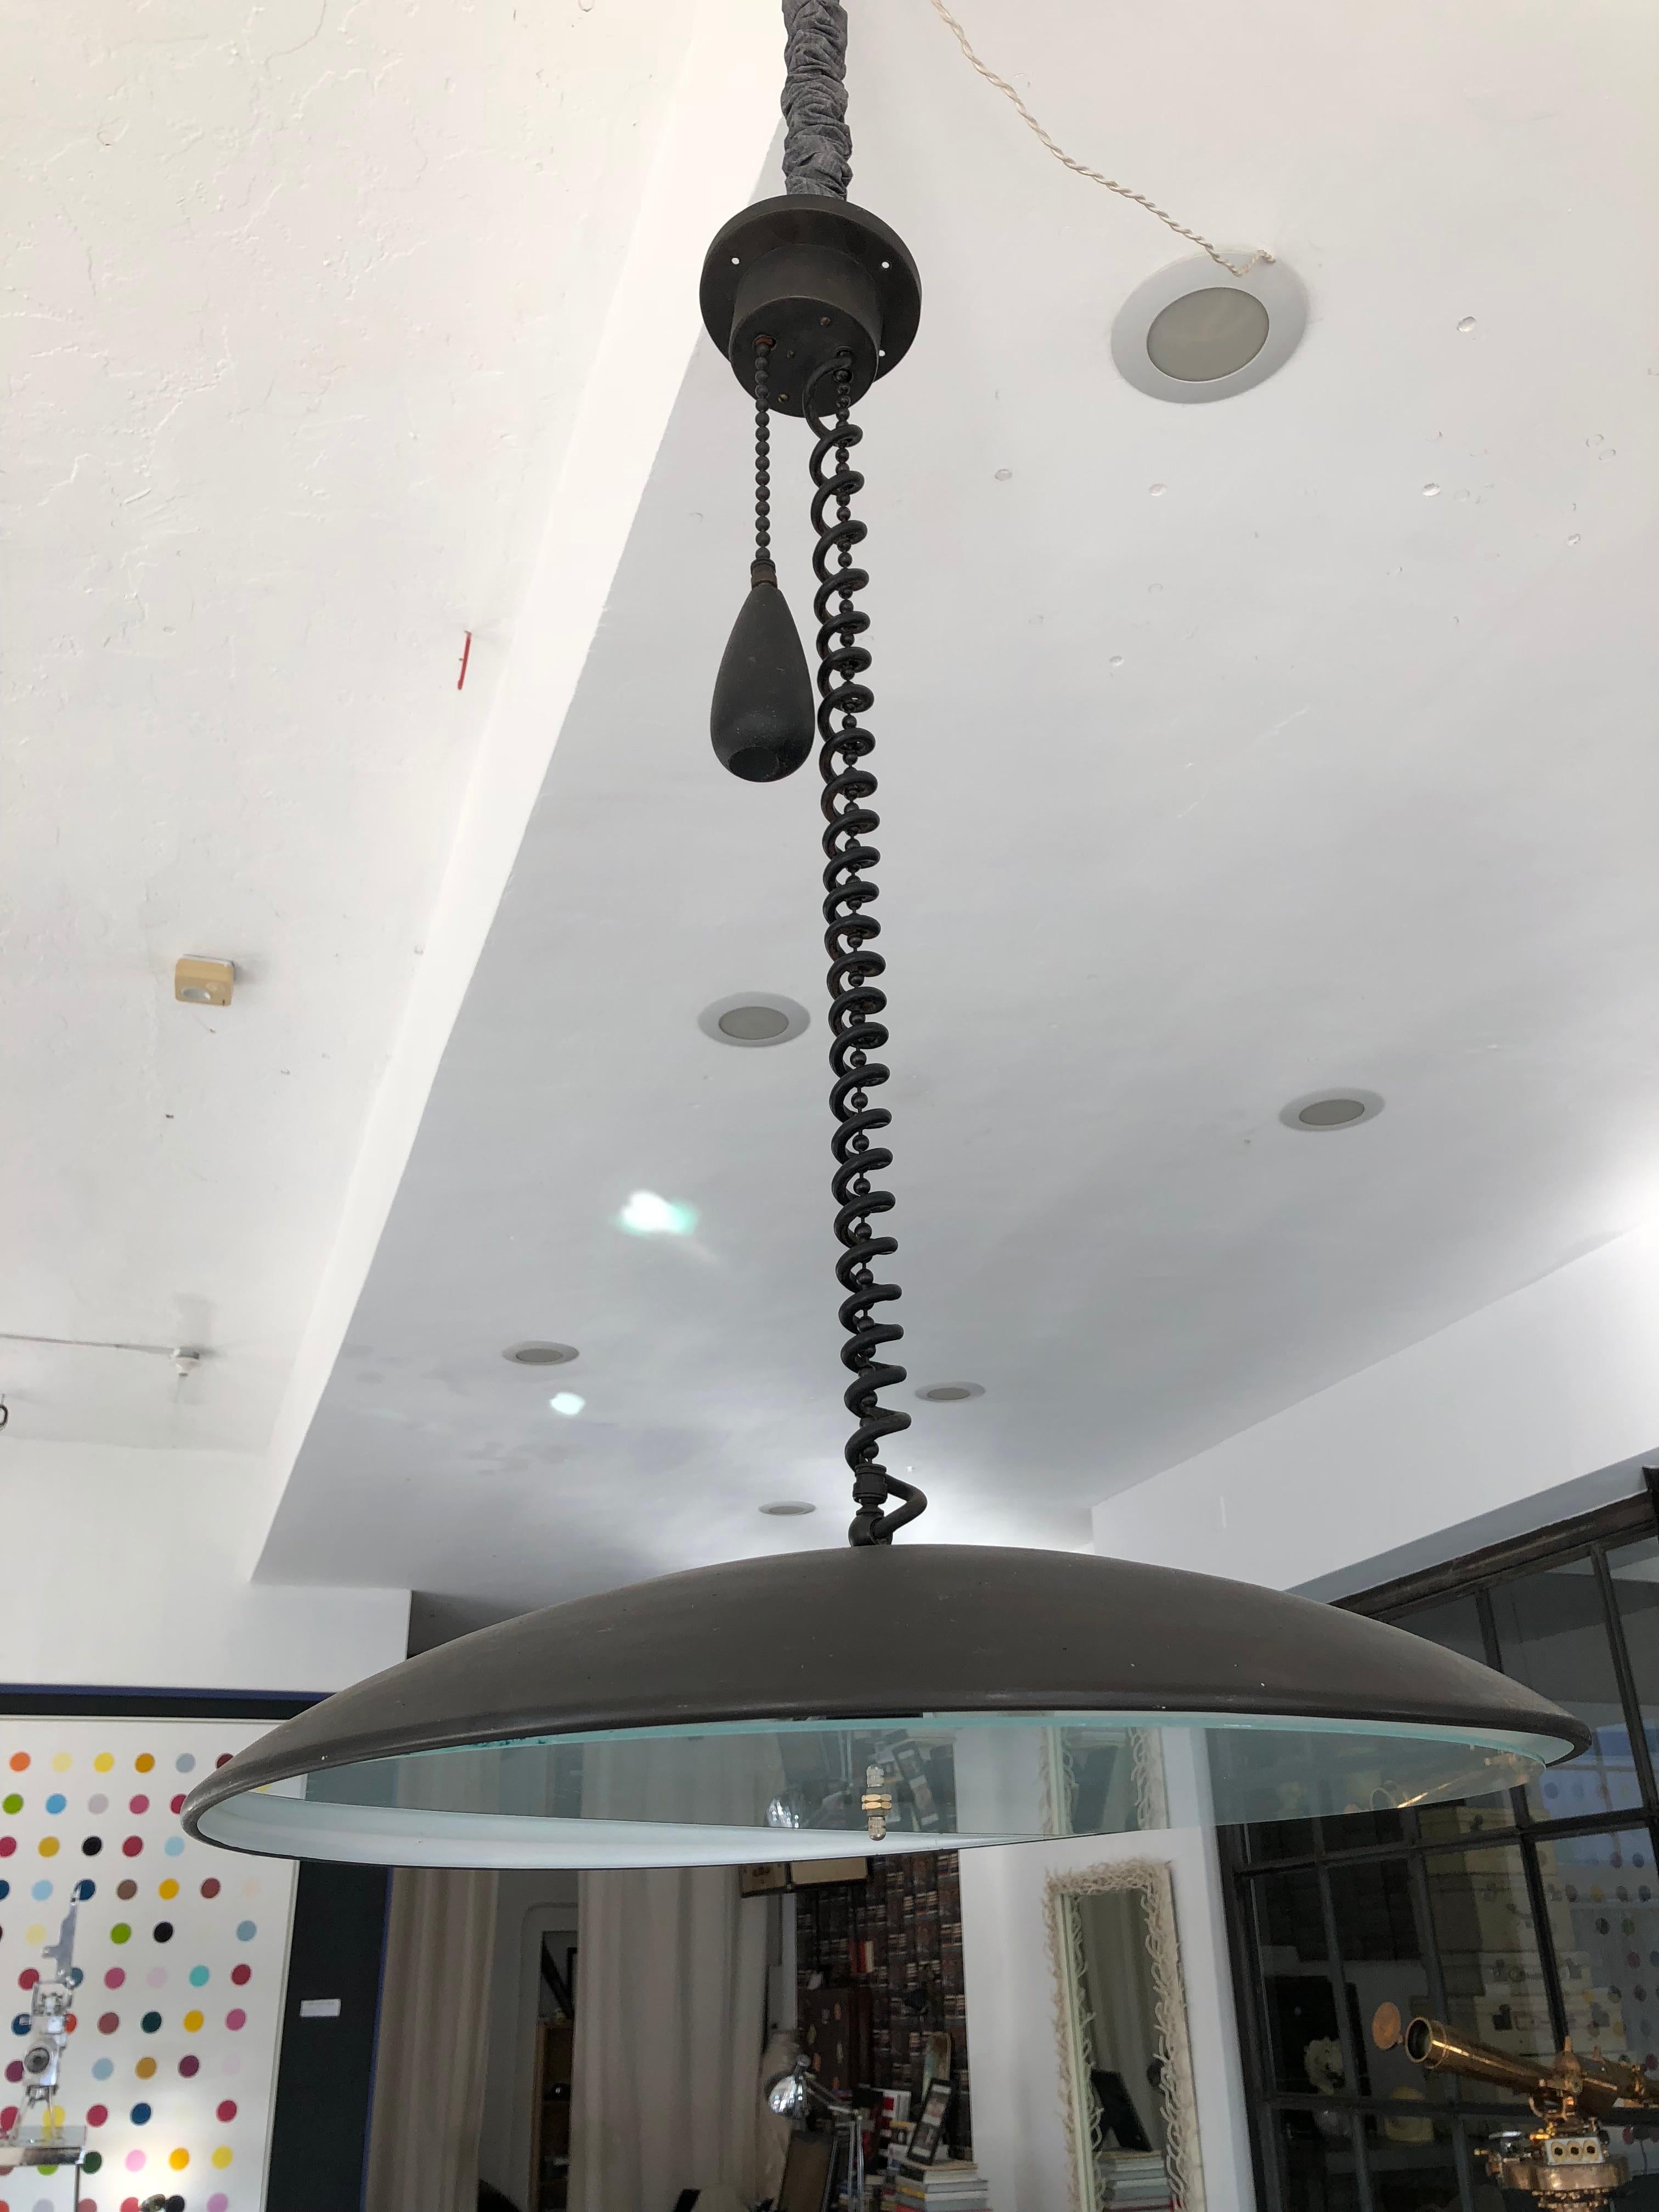 Industrial counter-balance pendant lamp after Paavo Tynell, 1940s. Solid brass covered with black patina. The pendant measures 24